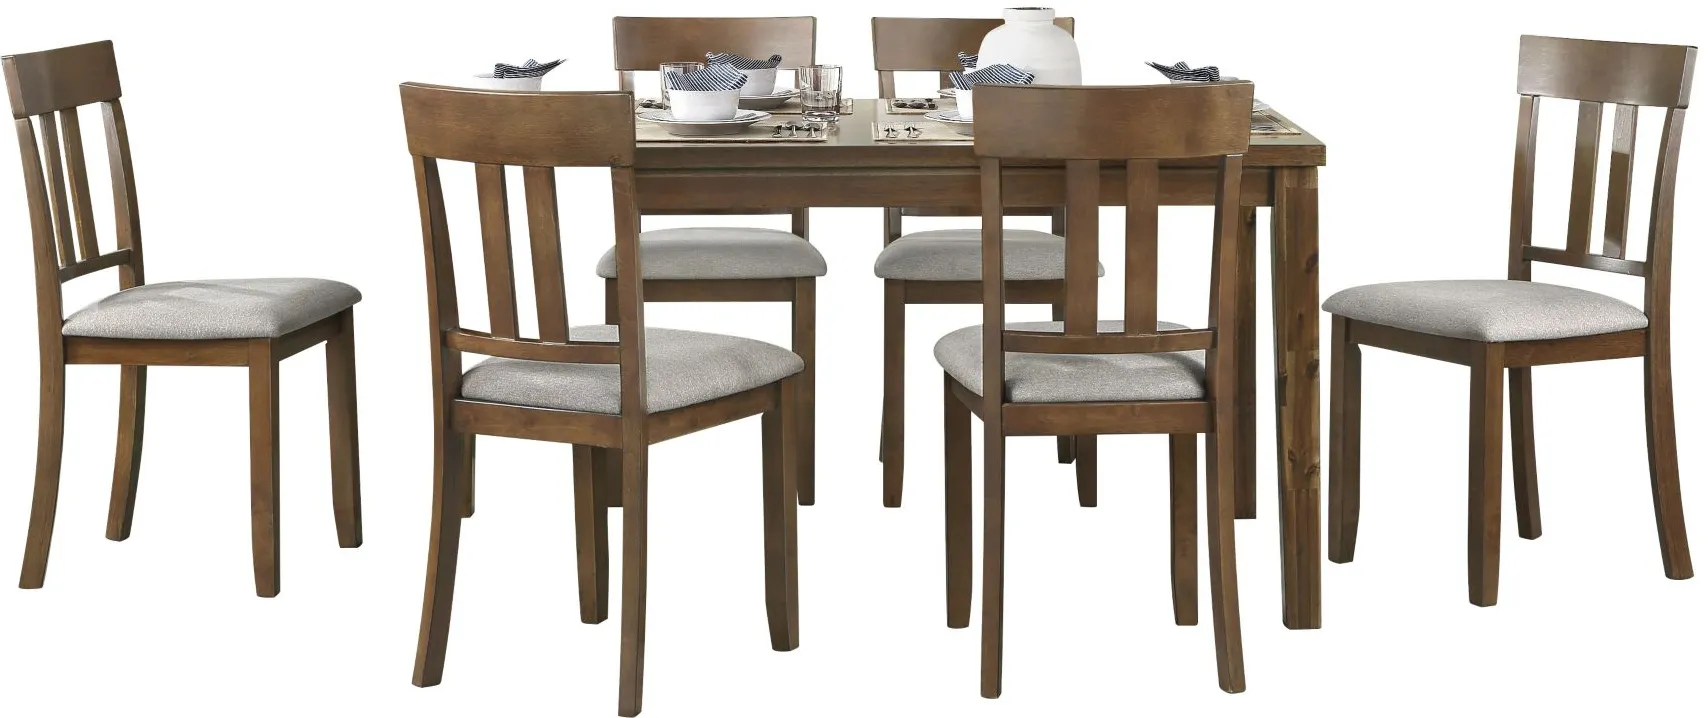 Tigard 7 Piece Dining Set in Cherry by Homelegance